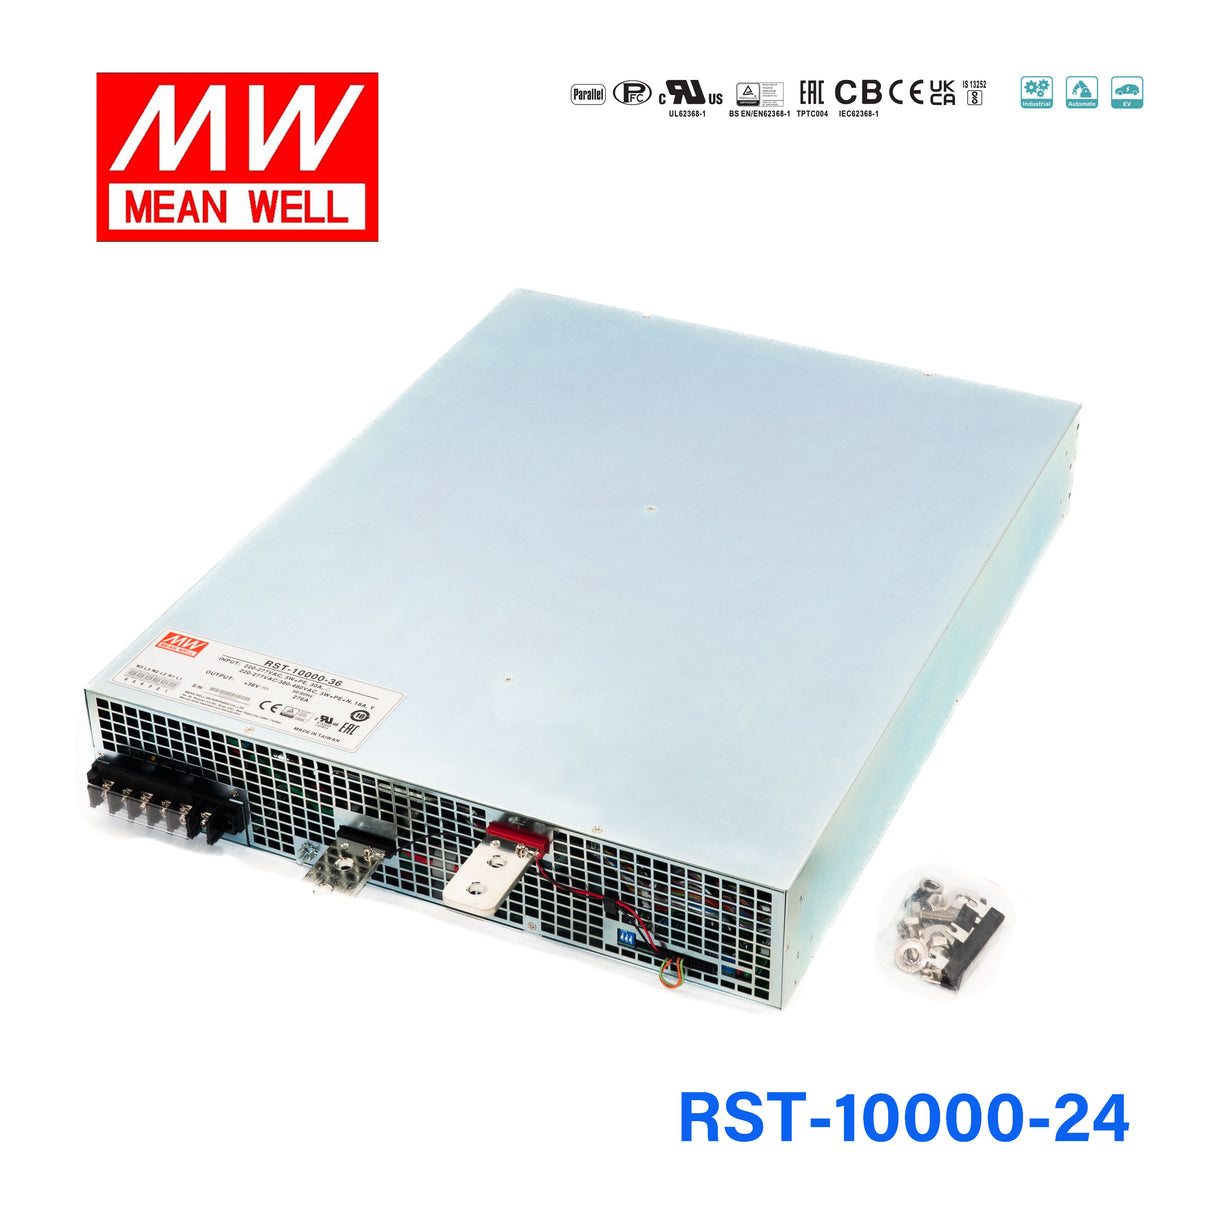 Mean Well RST-10000-24 Power Supply 9600W 24V